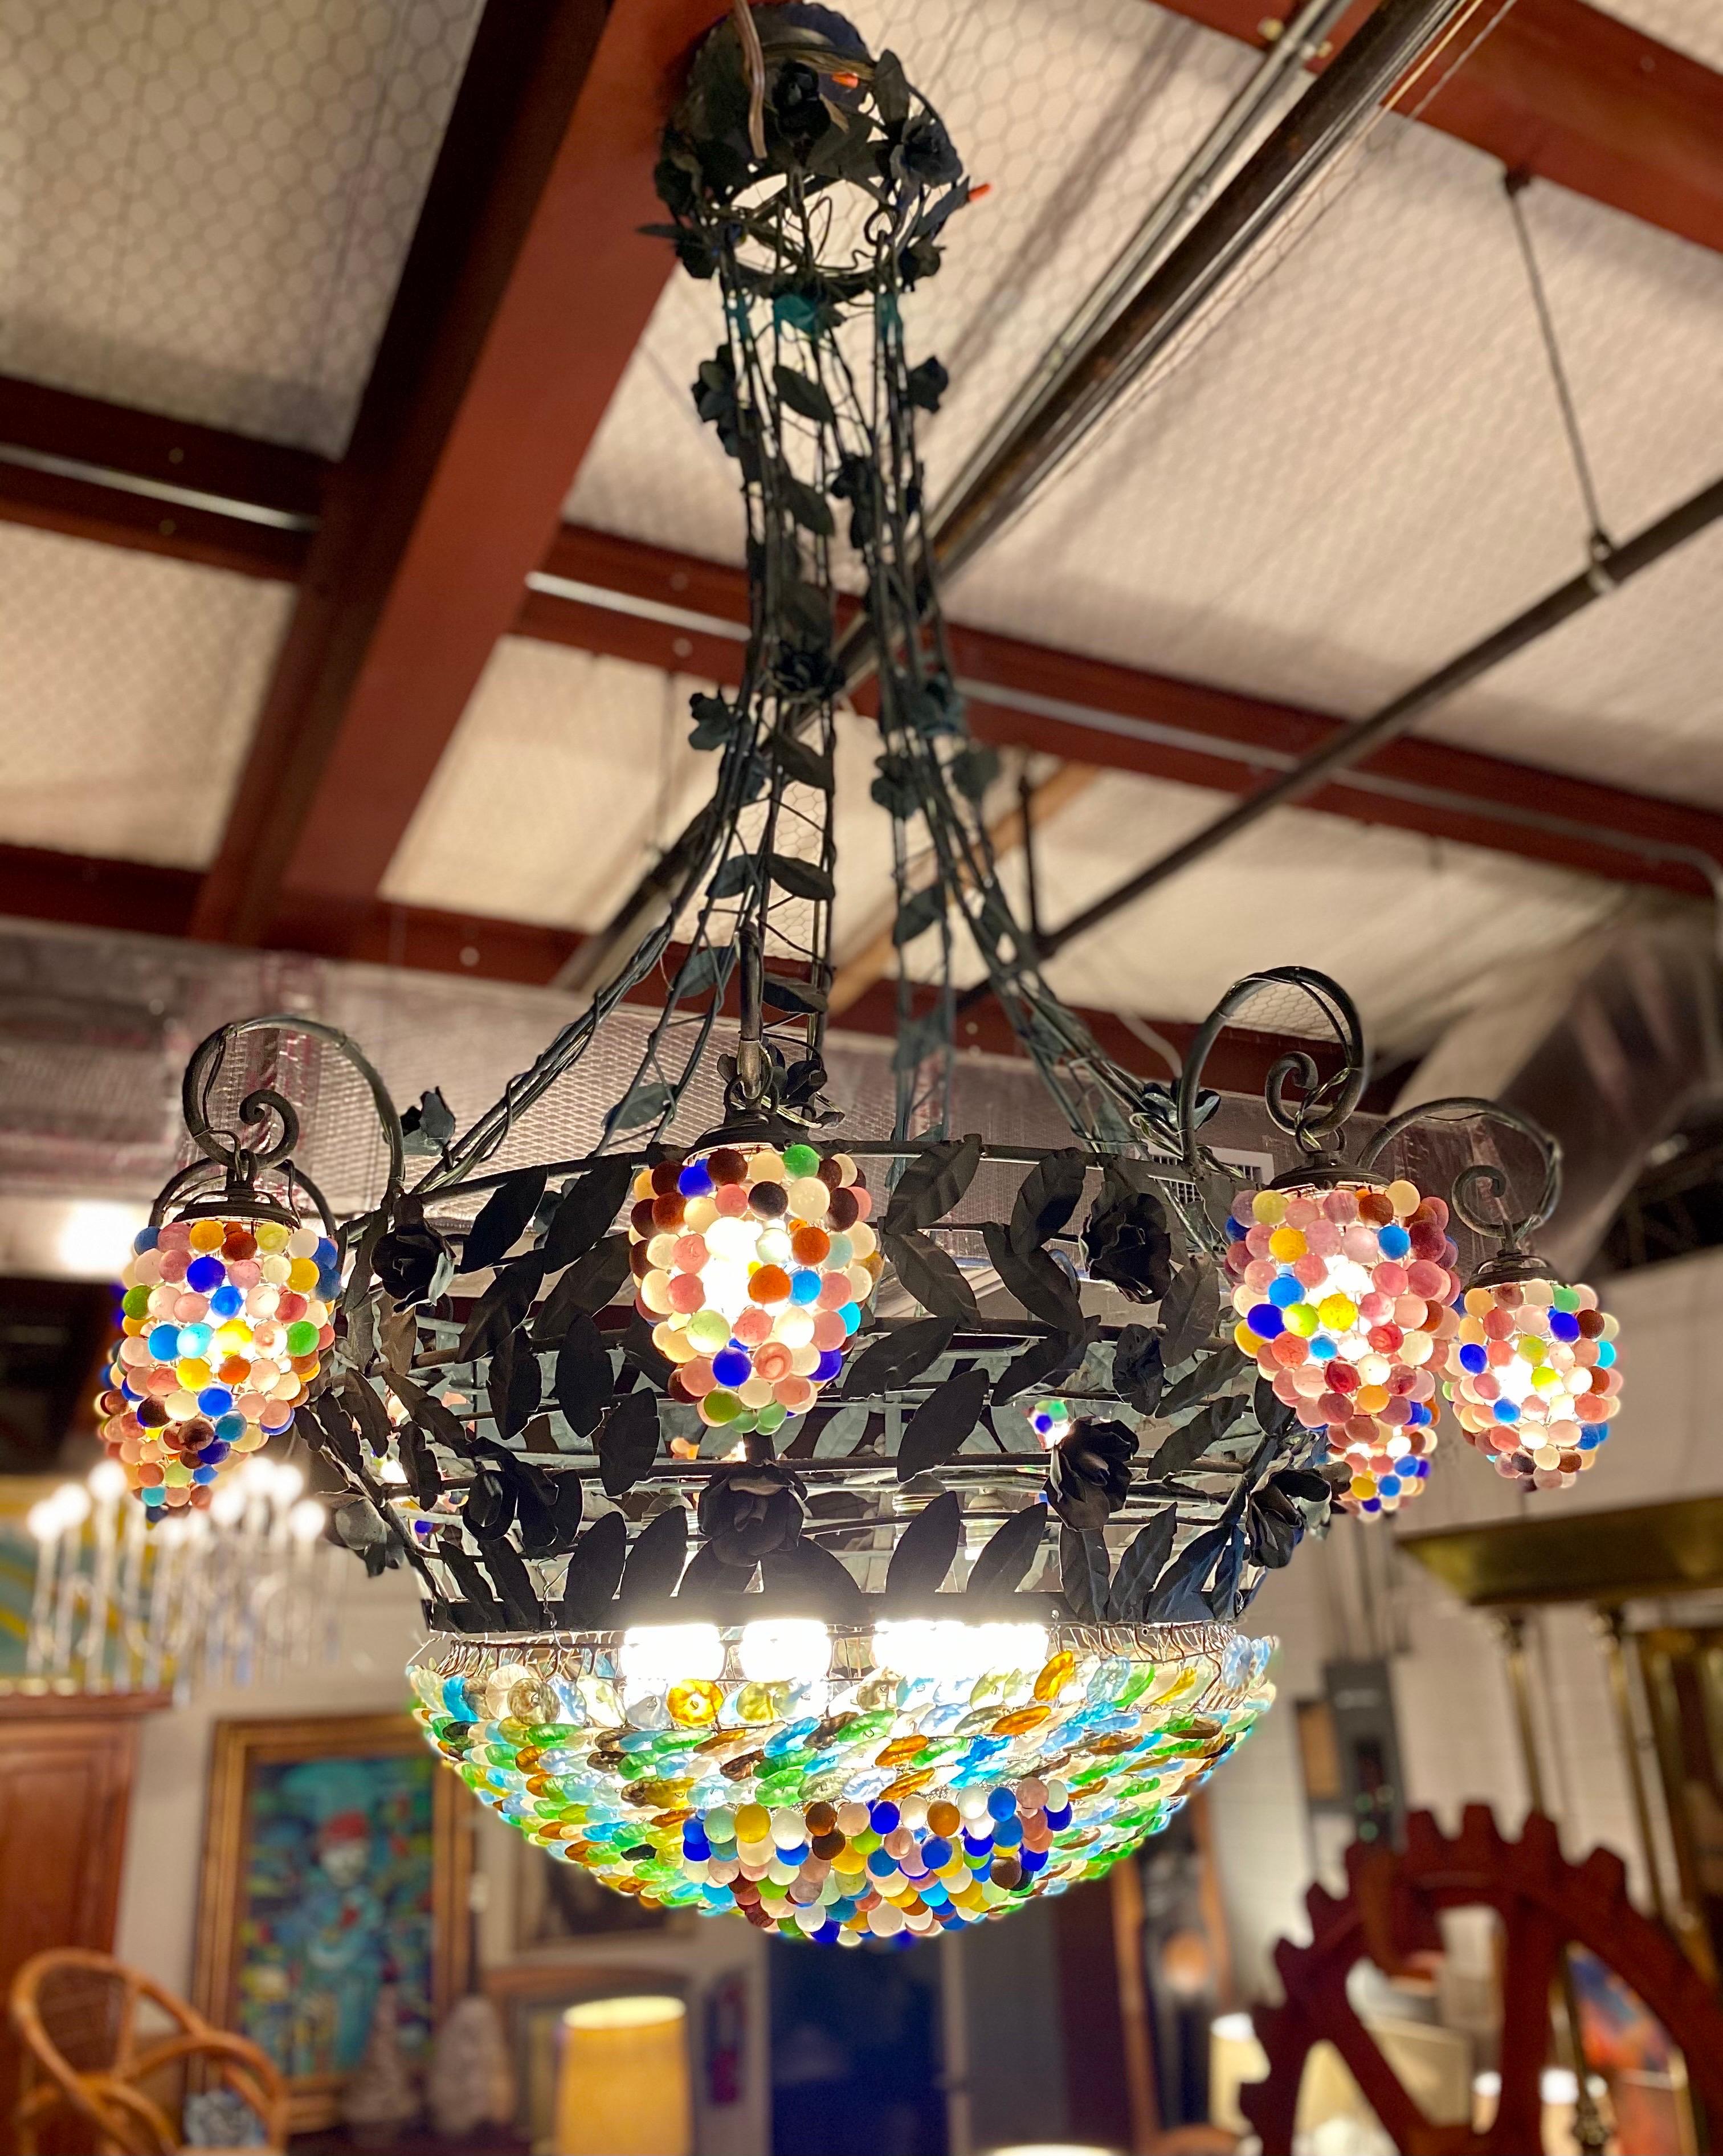 A stunning Italian 9-arm chandelier with multi-colored Murano glass grapes features a bowl base with multi-colored glass flowers and grapes while hanging from a metal frame that resembles vines with metal flowers and leaves painted in green. This